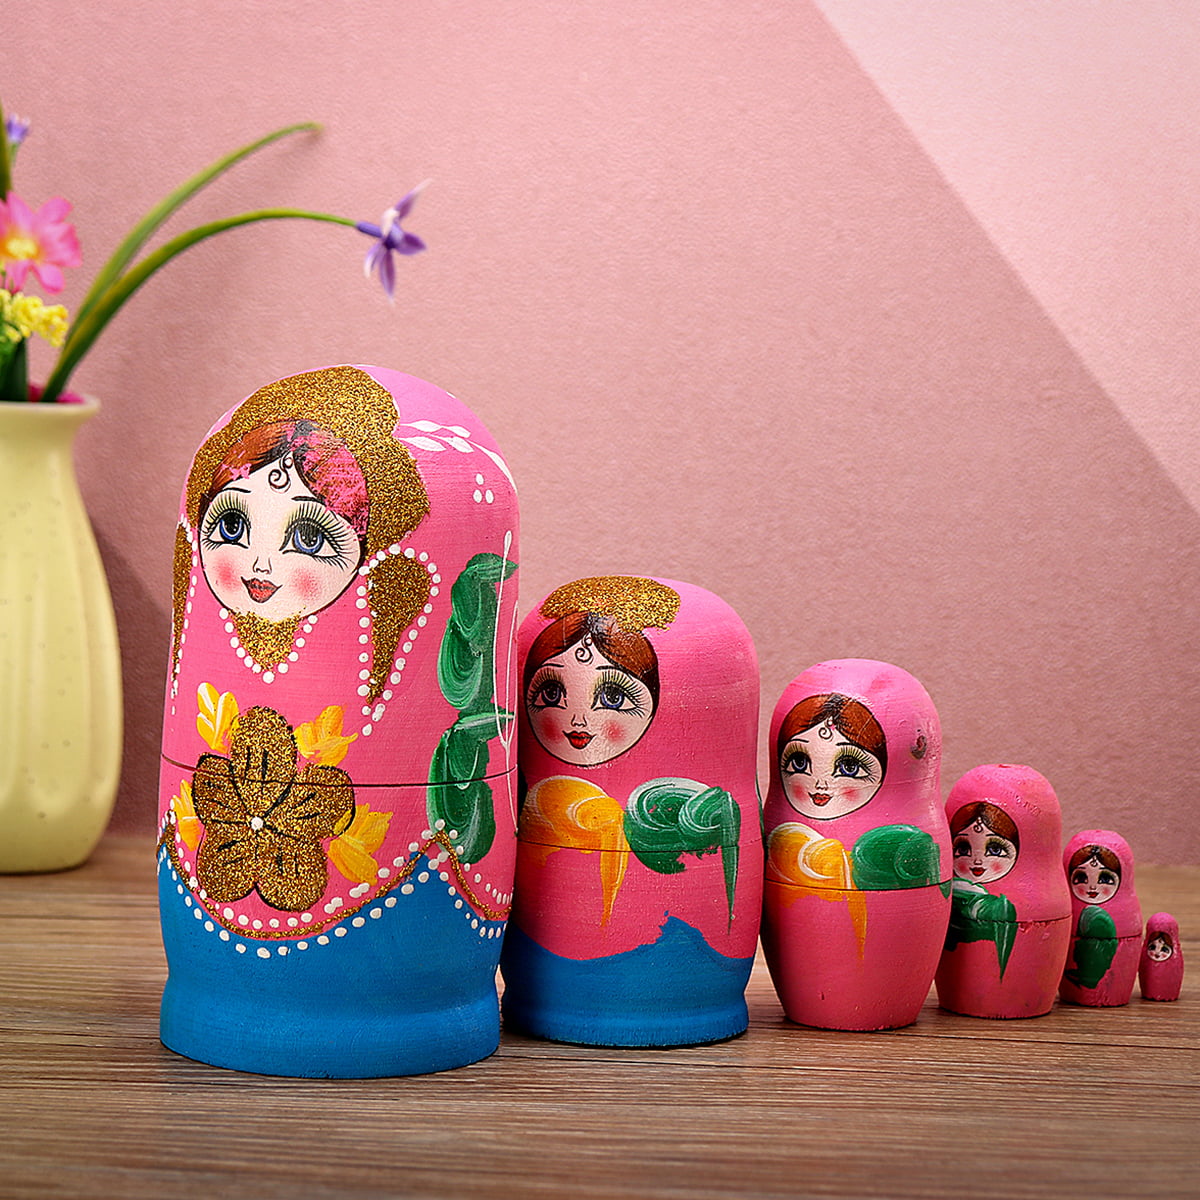 Nesting Dolls Handcrafted wooden Matryoshka Gold Painted Russian Doll 5 pieces-23 cm 5 dolls in 1 Traditional Stacking Wooden toy Home decor